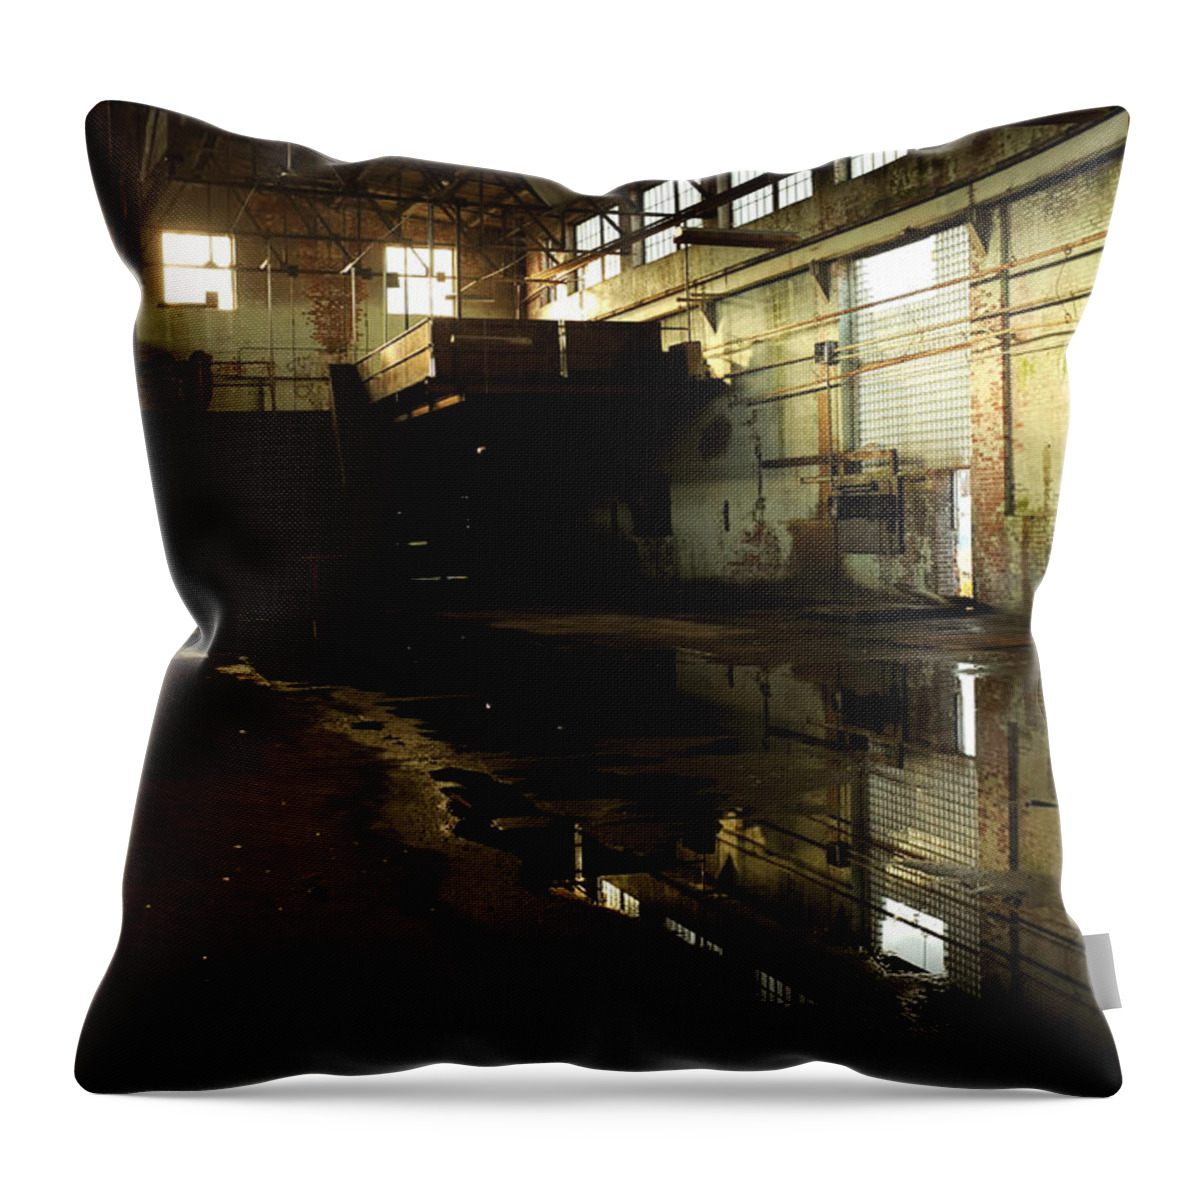 Abandoned Throw Pillow featuring the photograph Interior Of An Abandoned Factory by HD Connelly